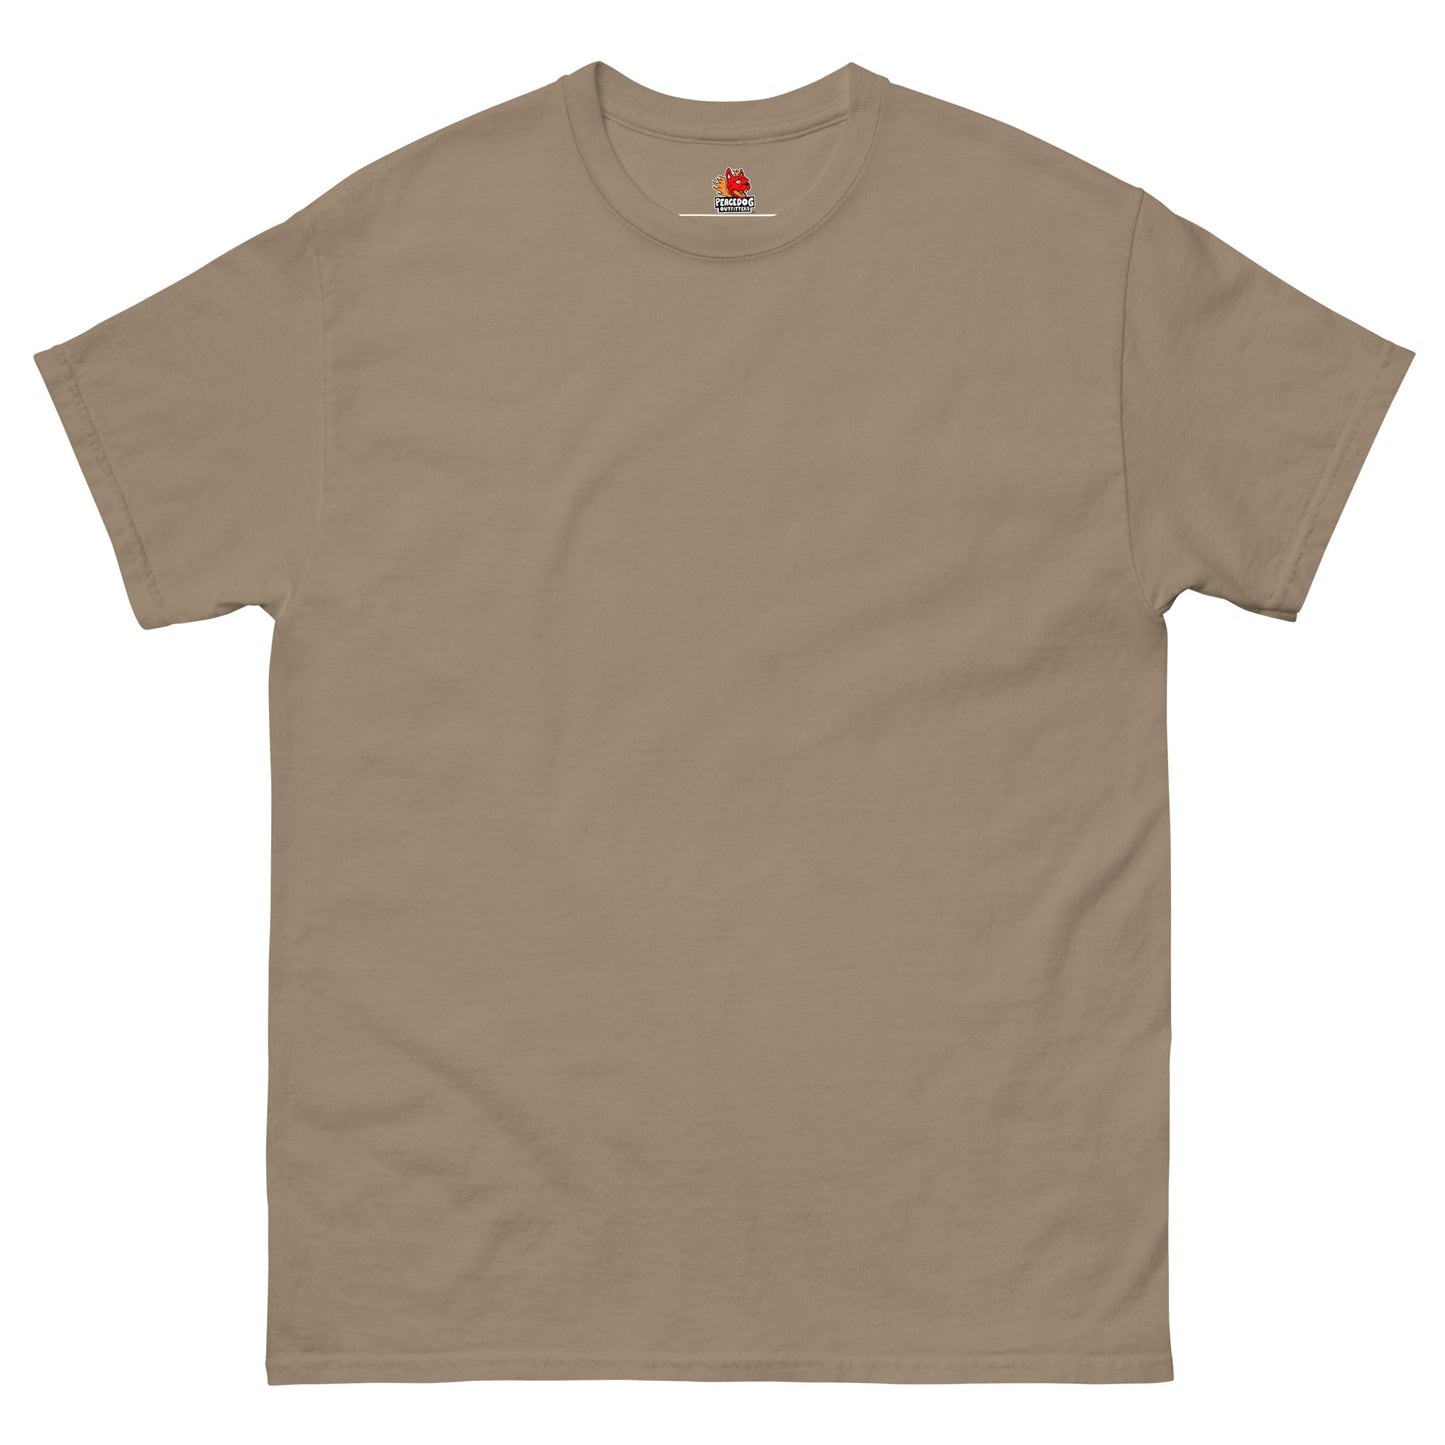 Yellowstone Park Summer Employee classic tee - Collage